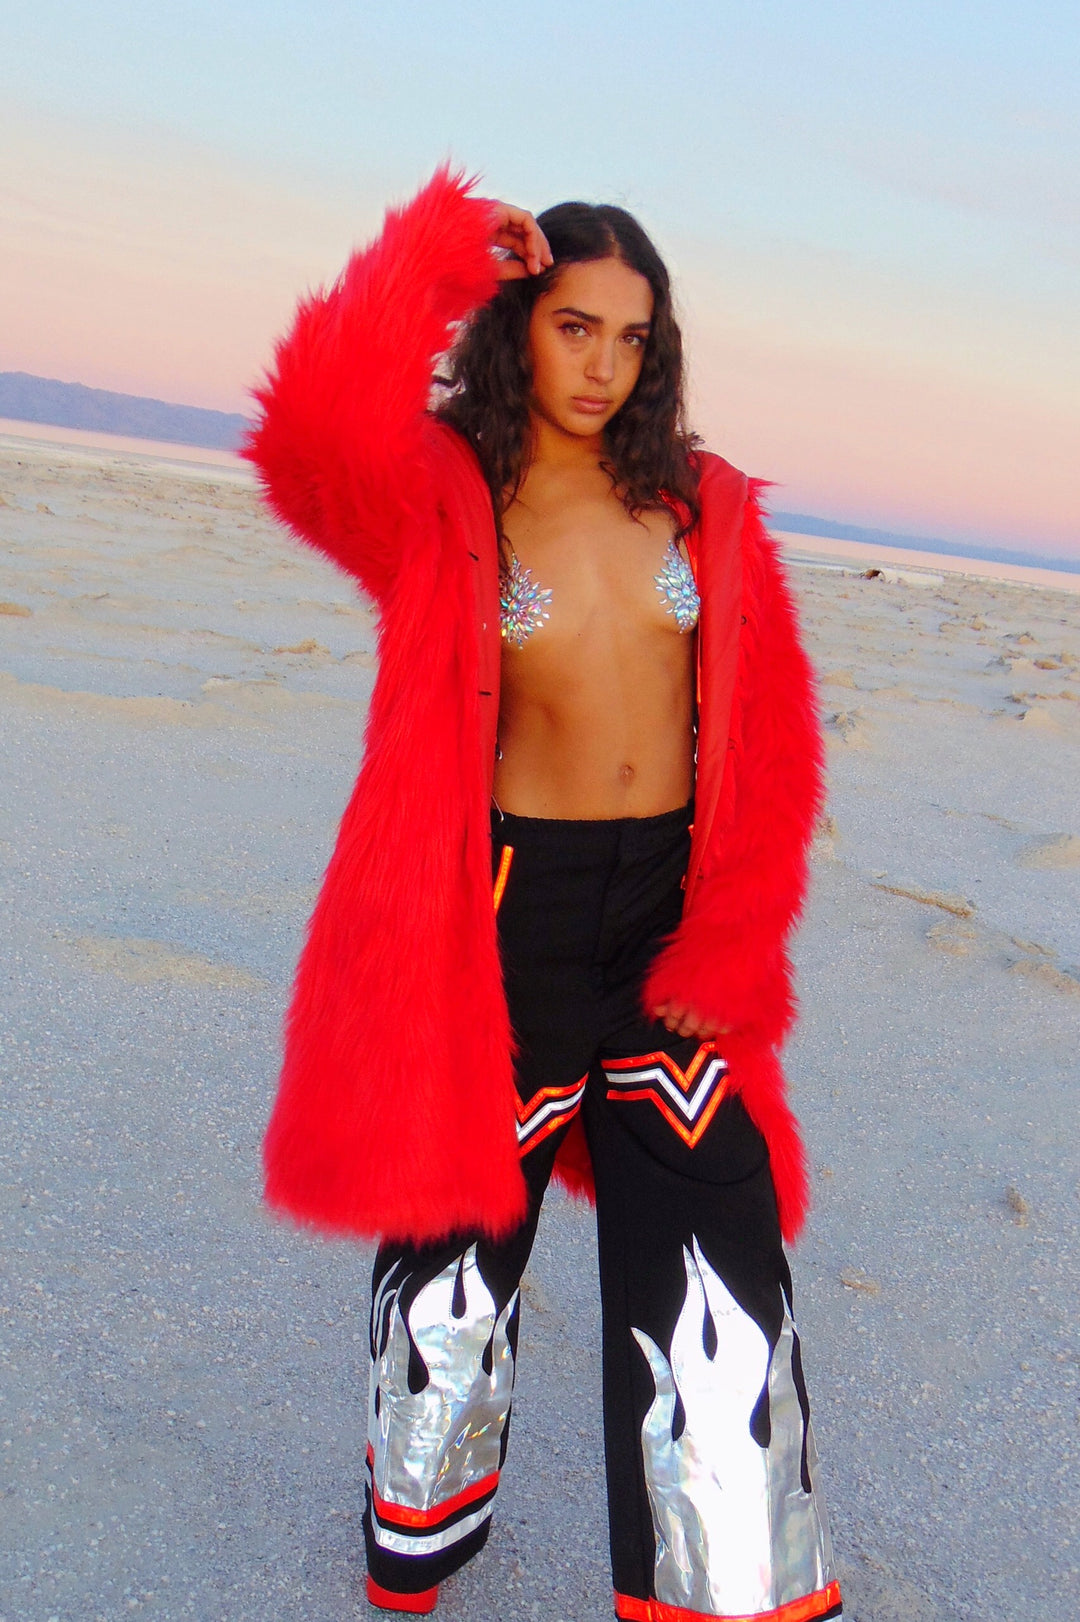 Bright red, long haired faux fur coat with hood by Space island. Spvce Island is a wearable art collective featuring festival fashion, rave wear, club wear and streetwear. Buy coats, jackets, platform boots, gogo boots, rainbow platform sneakers, holographic sandals, shoes, burning man goggles, crystal chokers, holographic corsets, joggers, rave bottoms, bikinis, harnesses, bondage and more. 